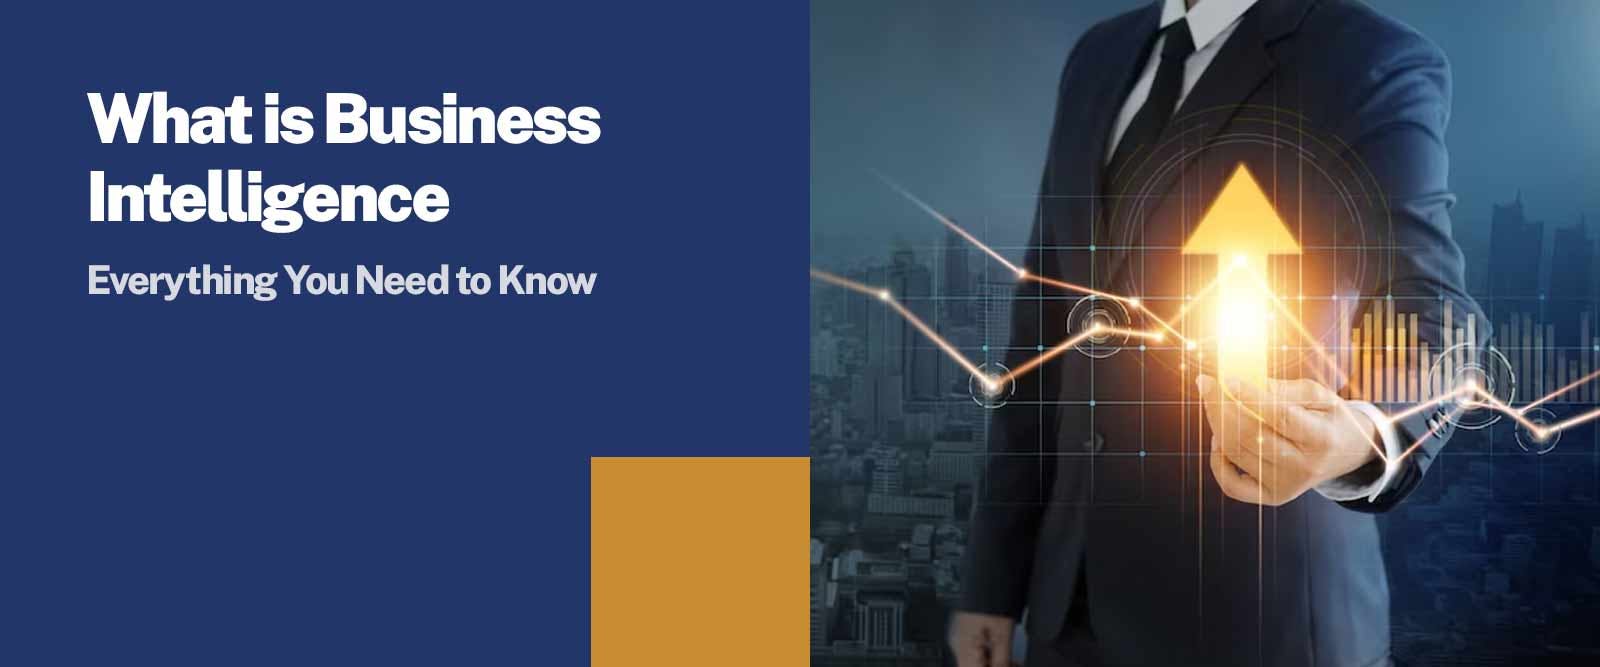 know about business intelligence